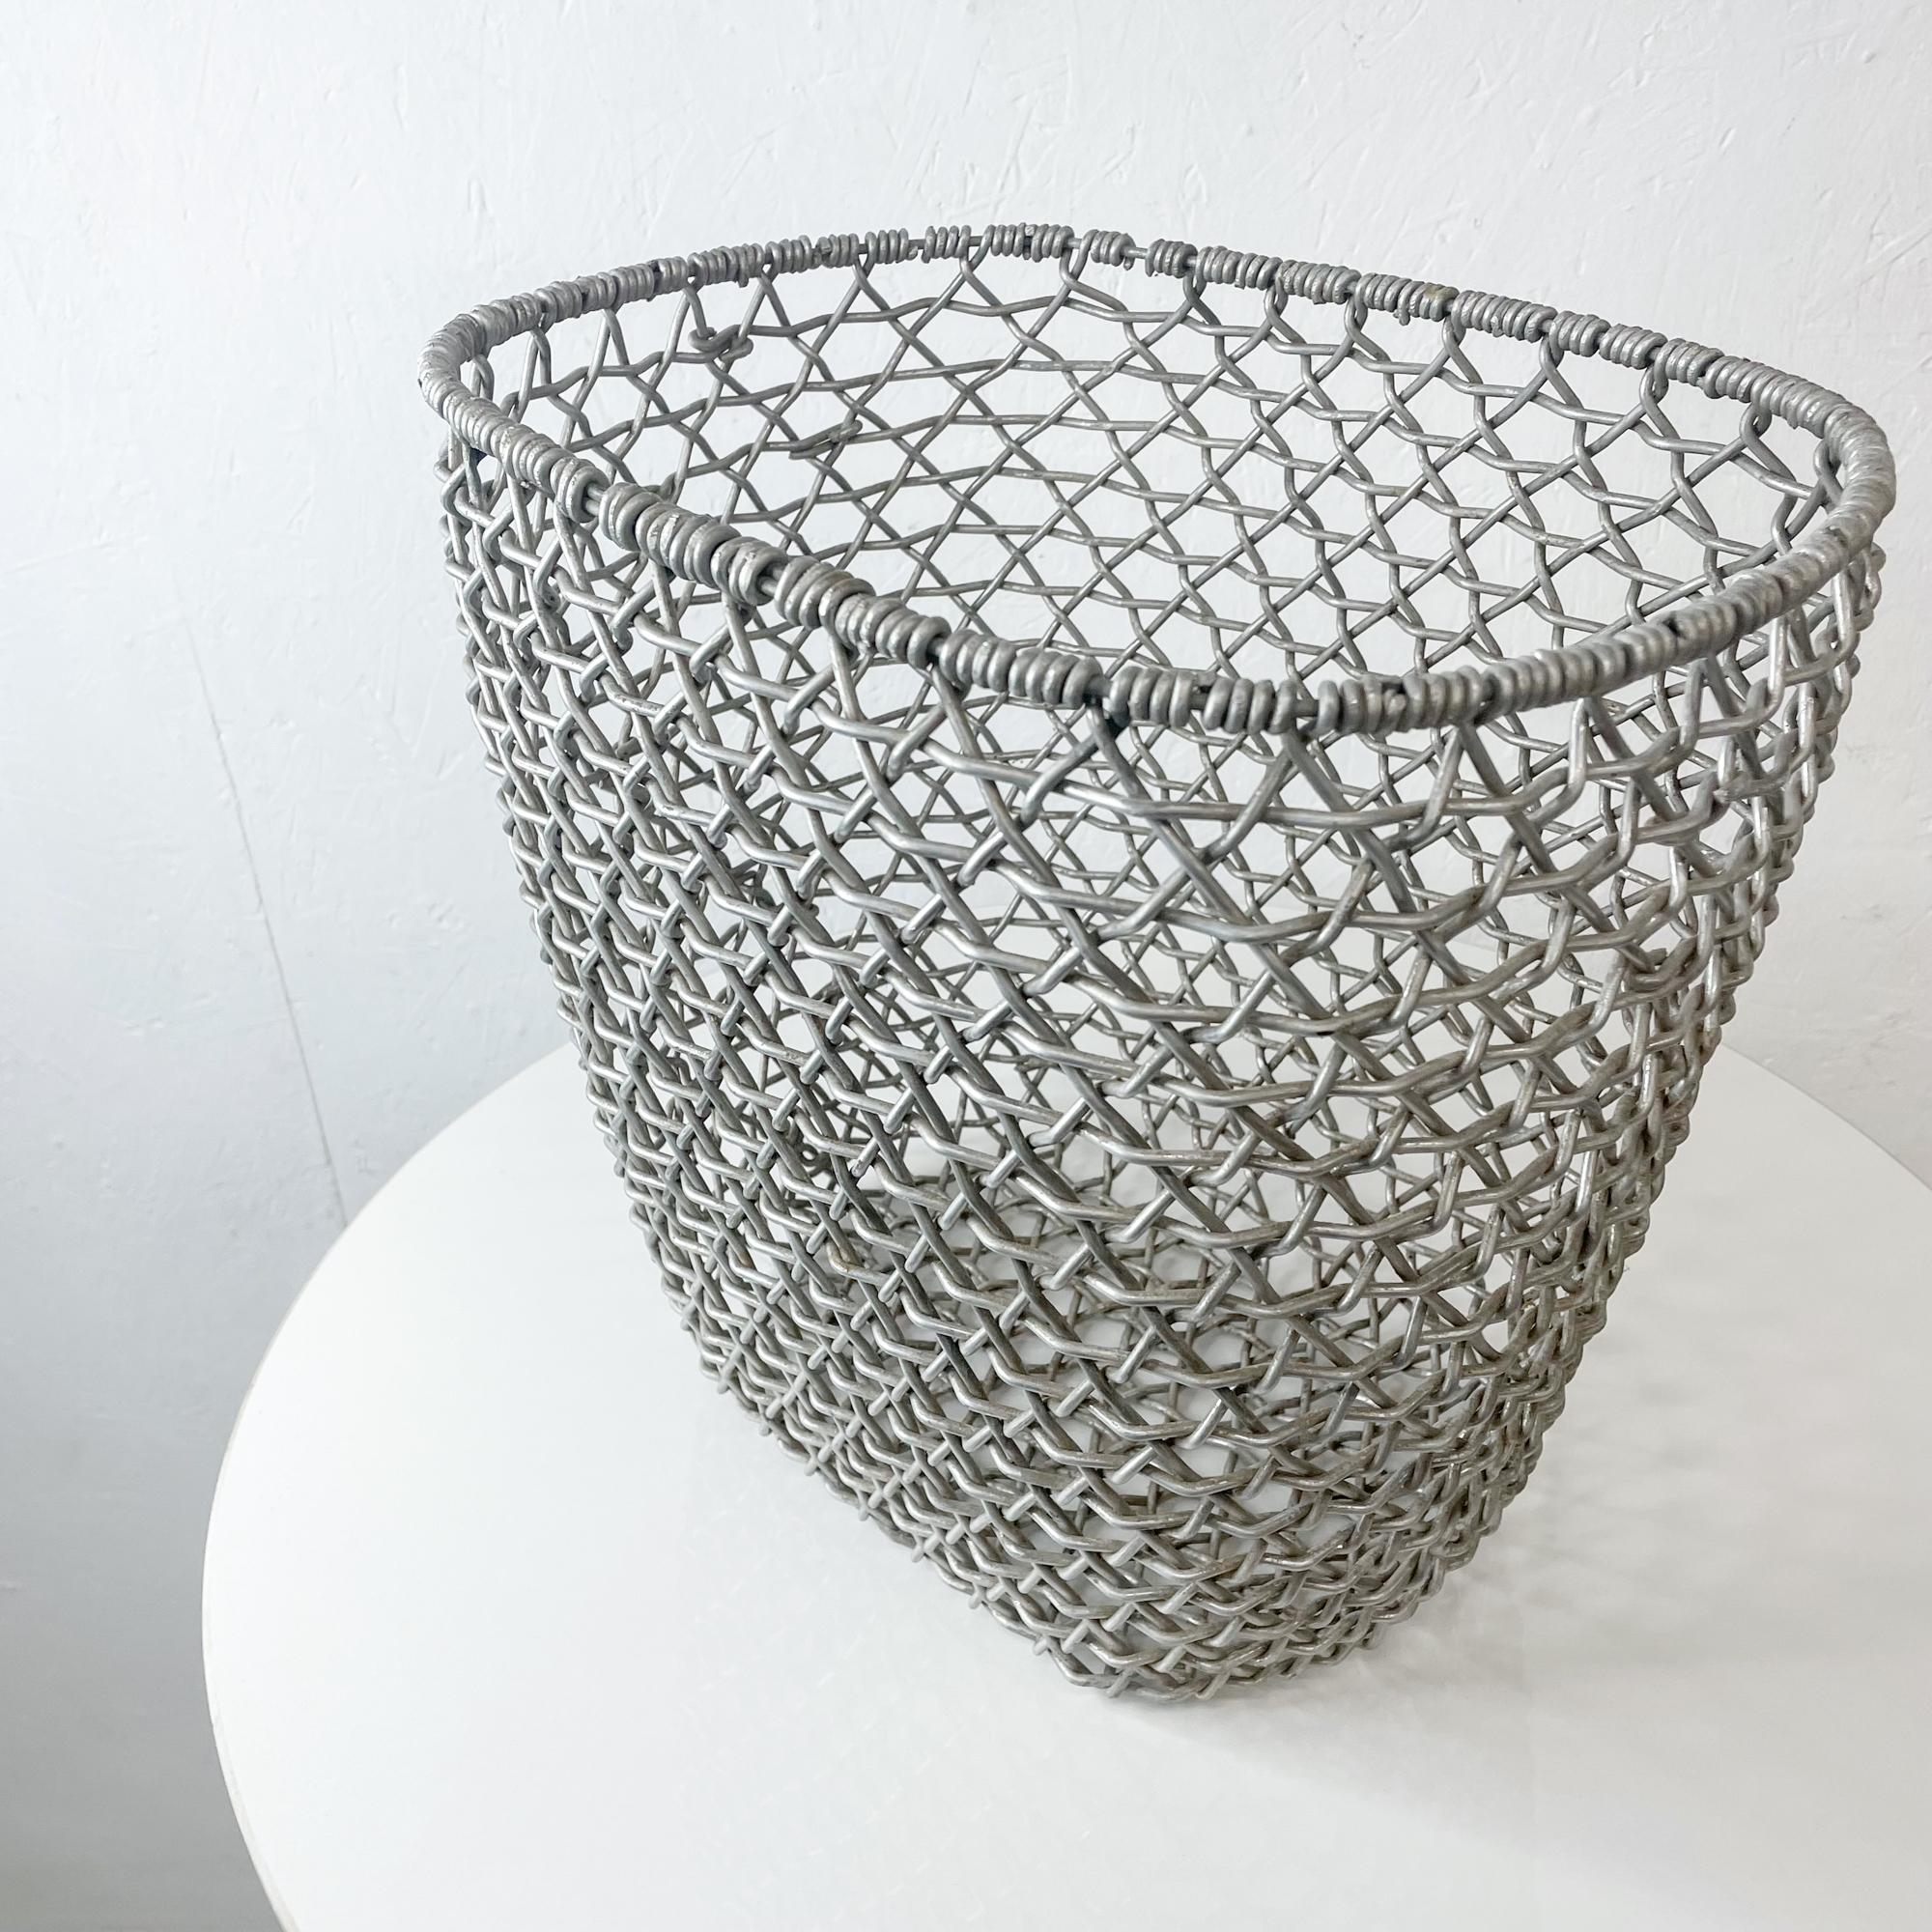 Mid-Century Modern Vintage Wire Basket Metal Weave in Aluminum Modern Container Open Grid 1970s